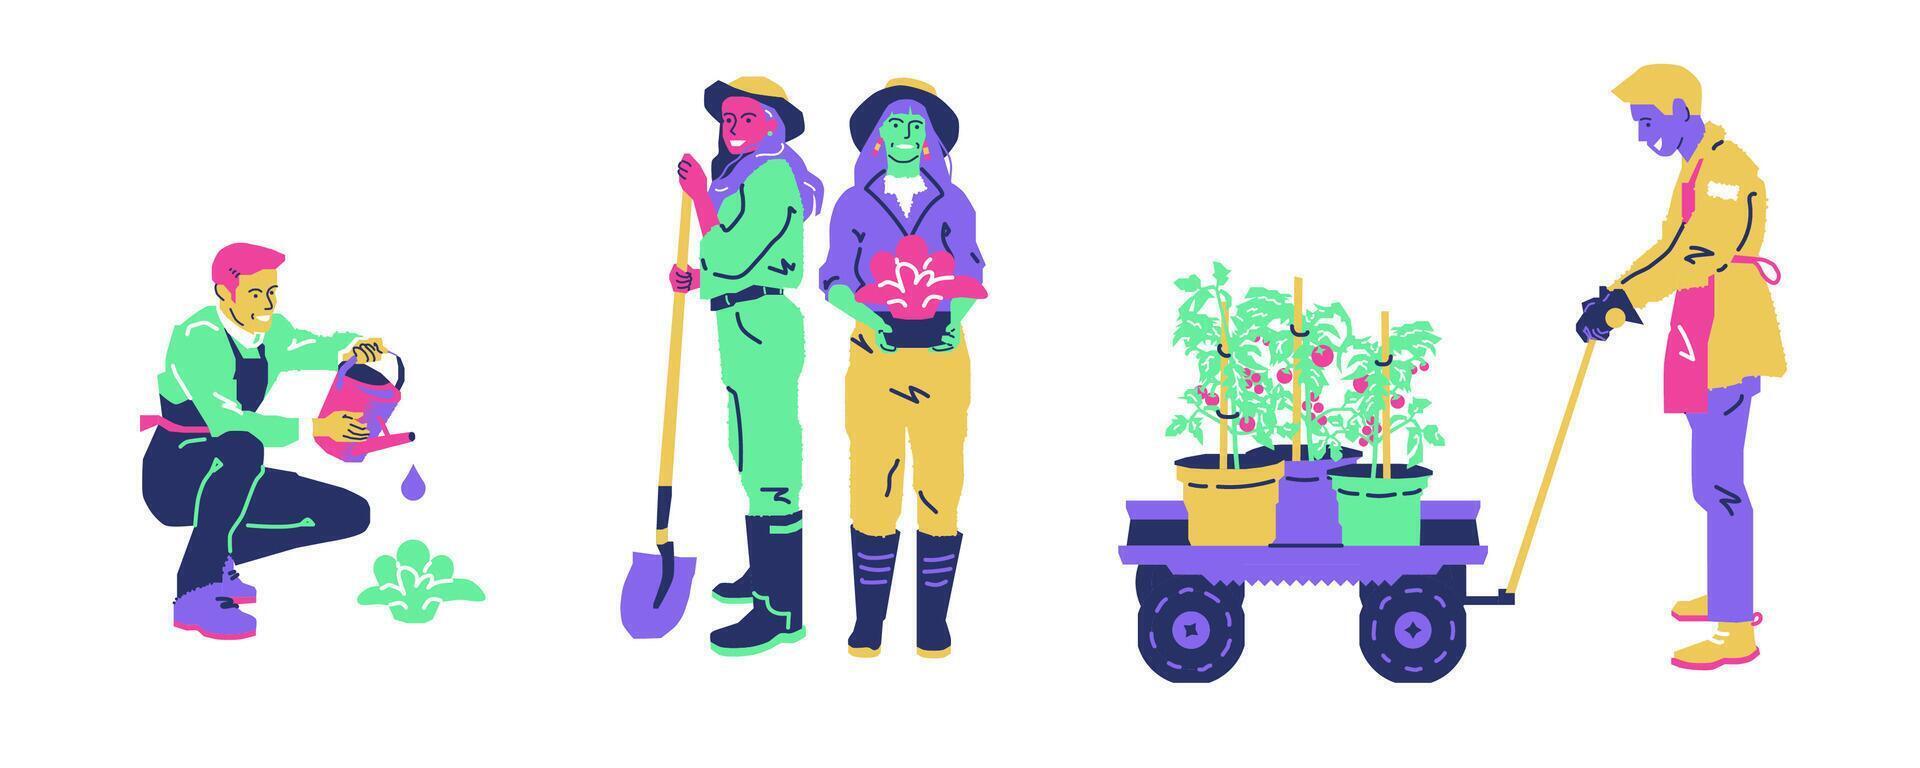 People gardening. Watering plant, transporting pots, women planting flowers. Organic growing. Agriculture gardener hobby and garden job. Flat cartoon vector illustration isolated on white background.